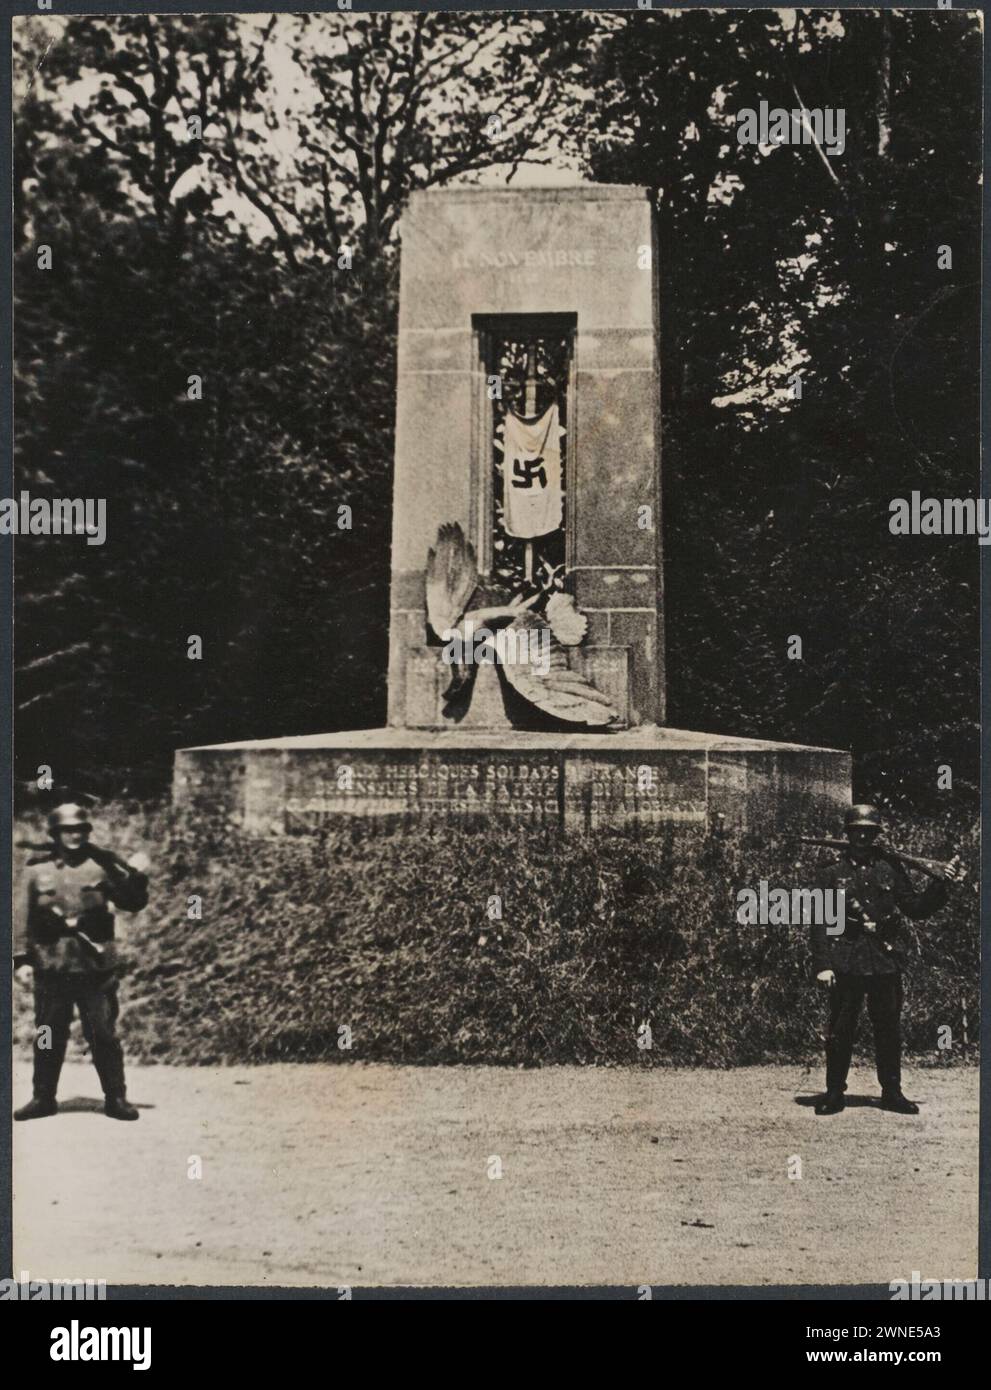 German Nazi flag hangs from a memorial in the Compiègne Forest (france). Two German soldiers before that   June 21, 1940 Stock Photo